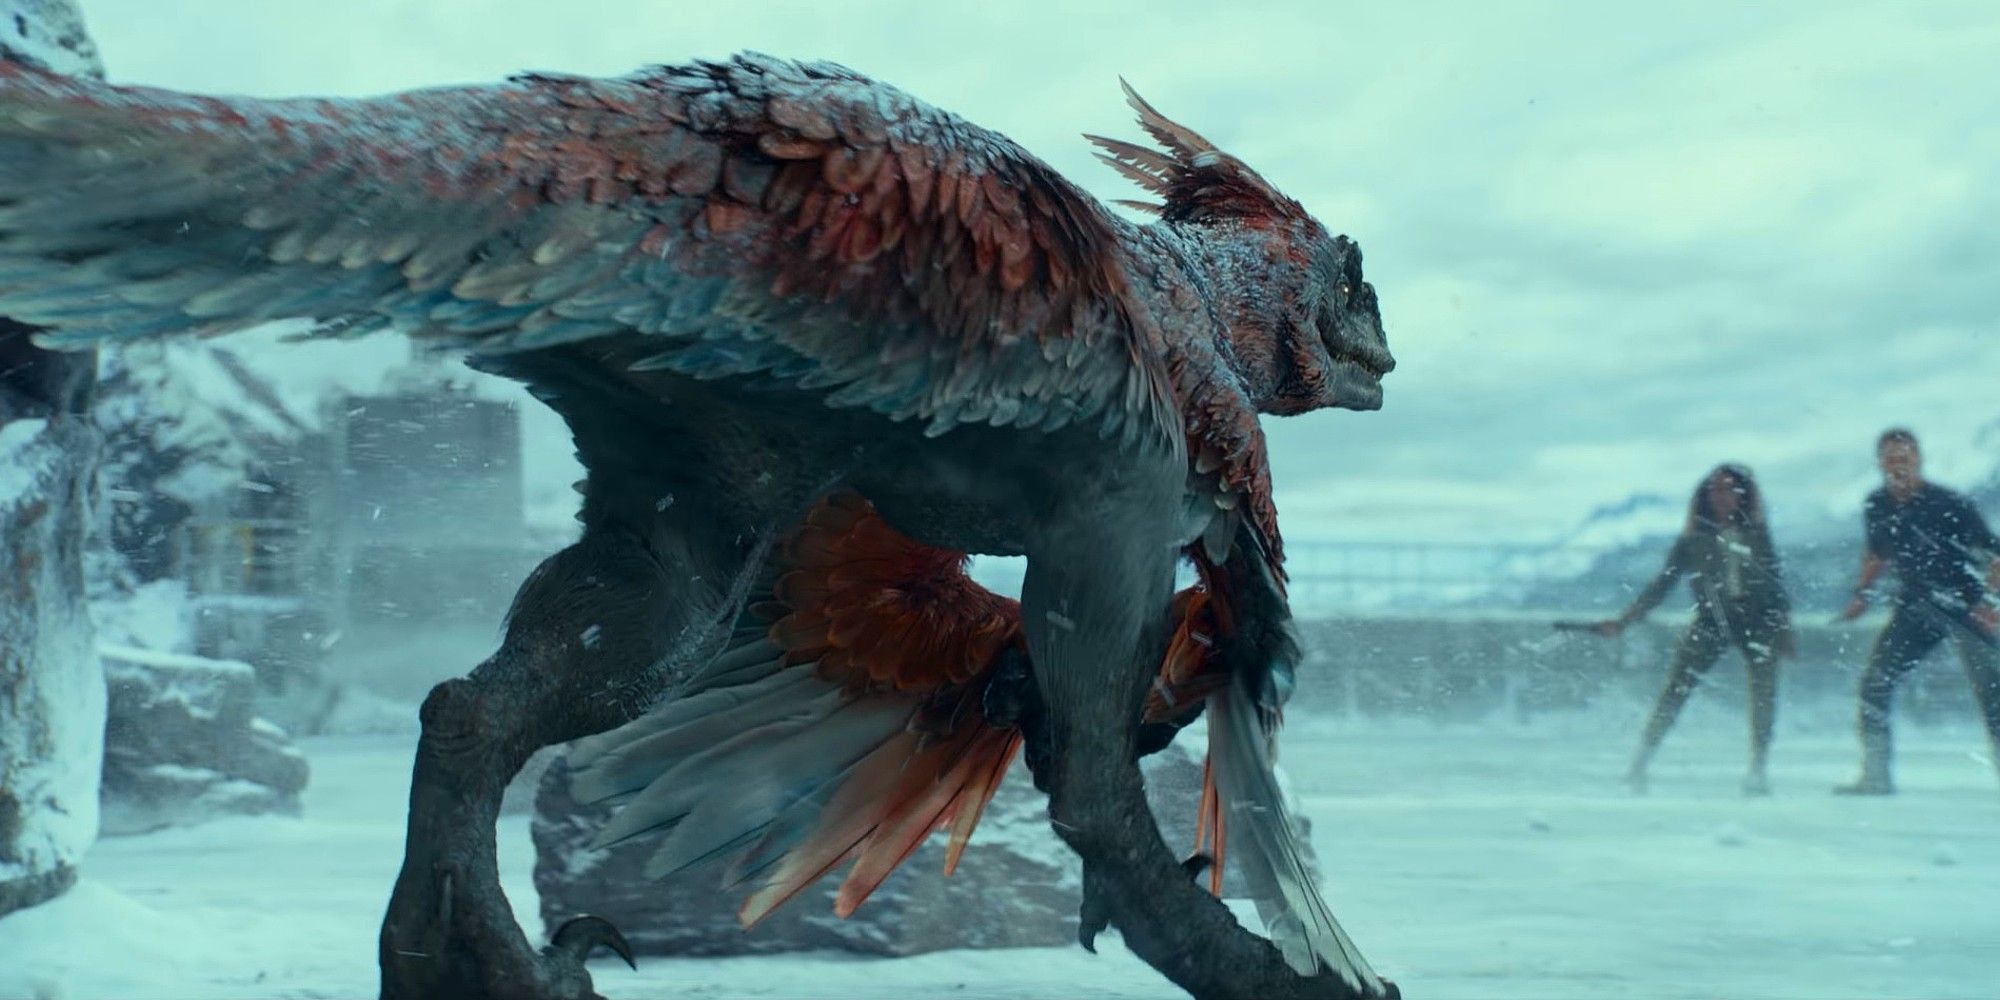 Jurassic World Dominion Debut Trailer Shows Dinos In The Snow